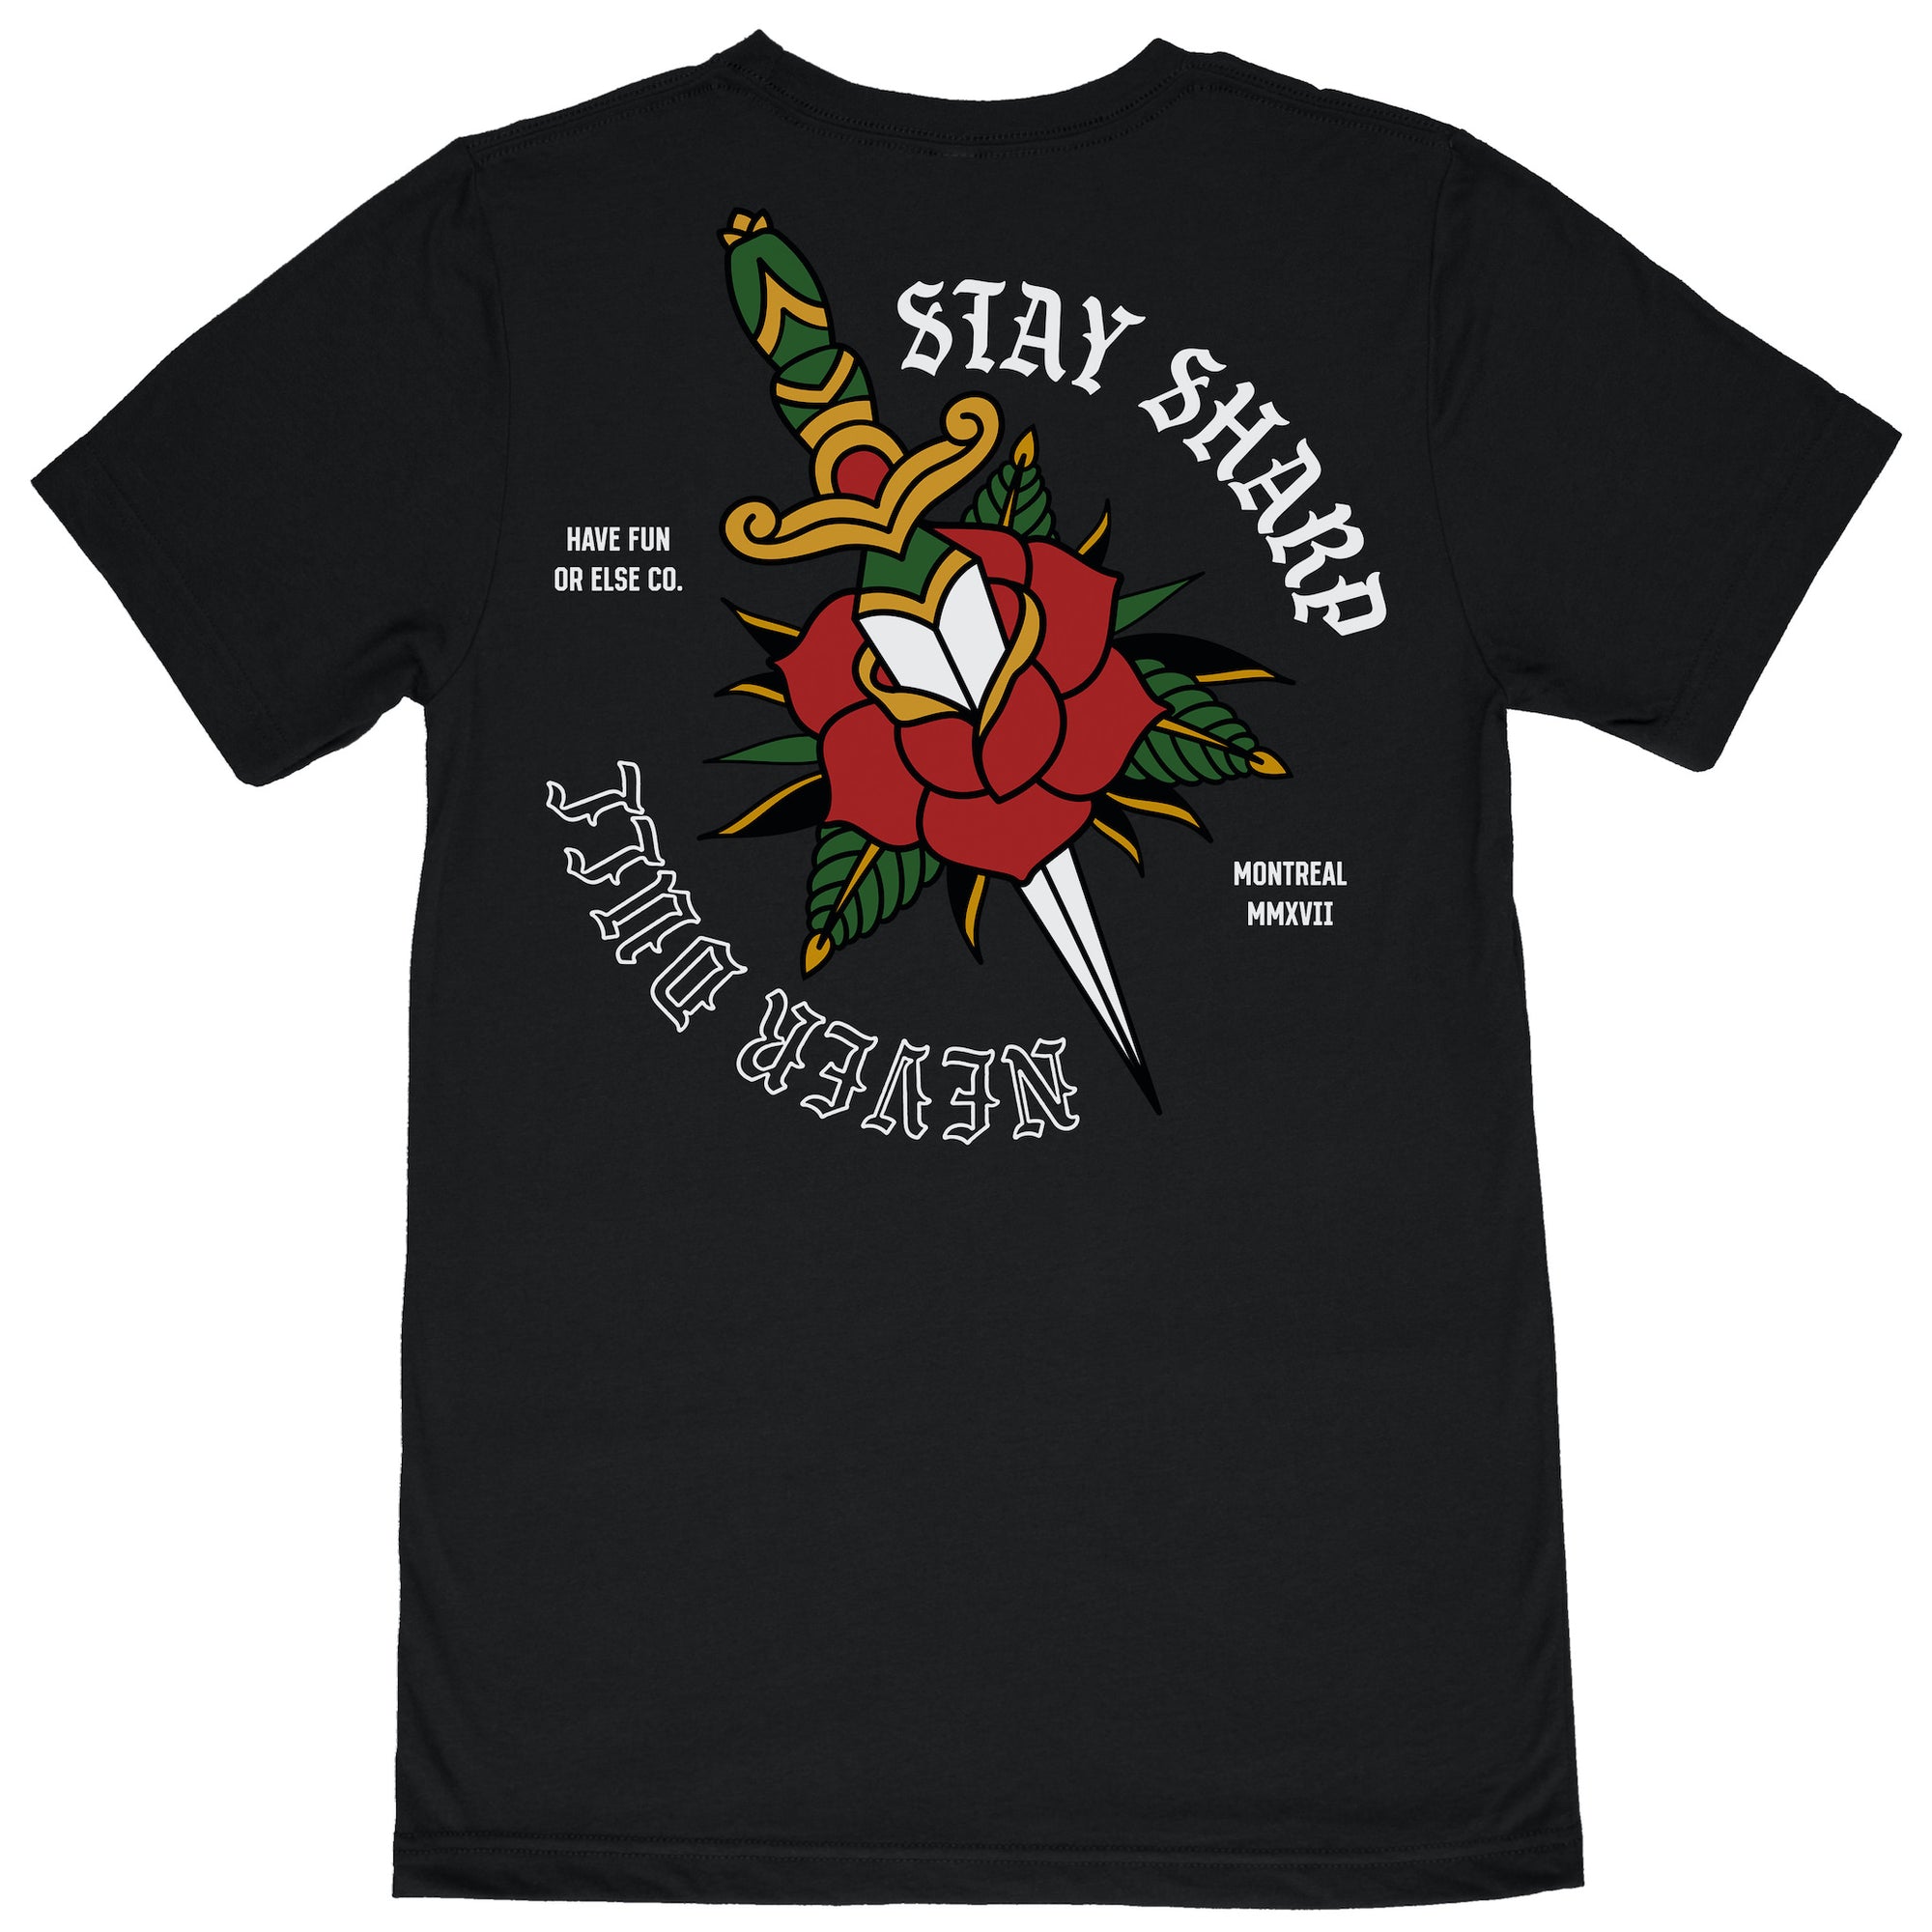 Have Fun Or Else Stay Sharp black tee, back